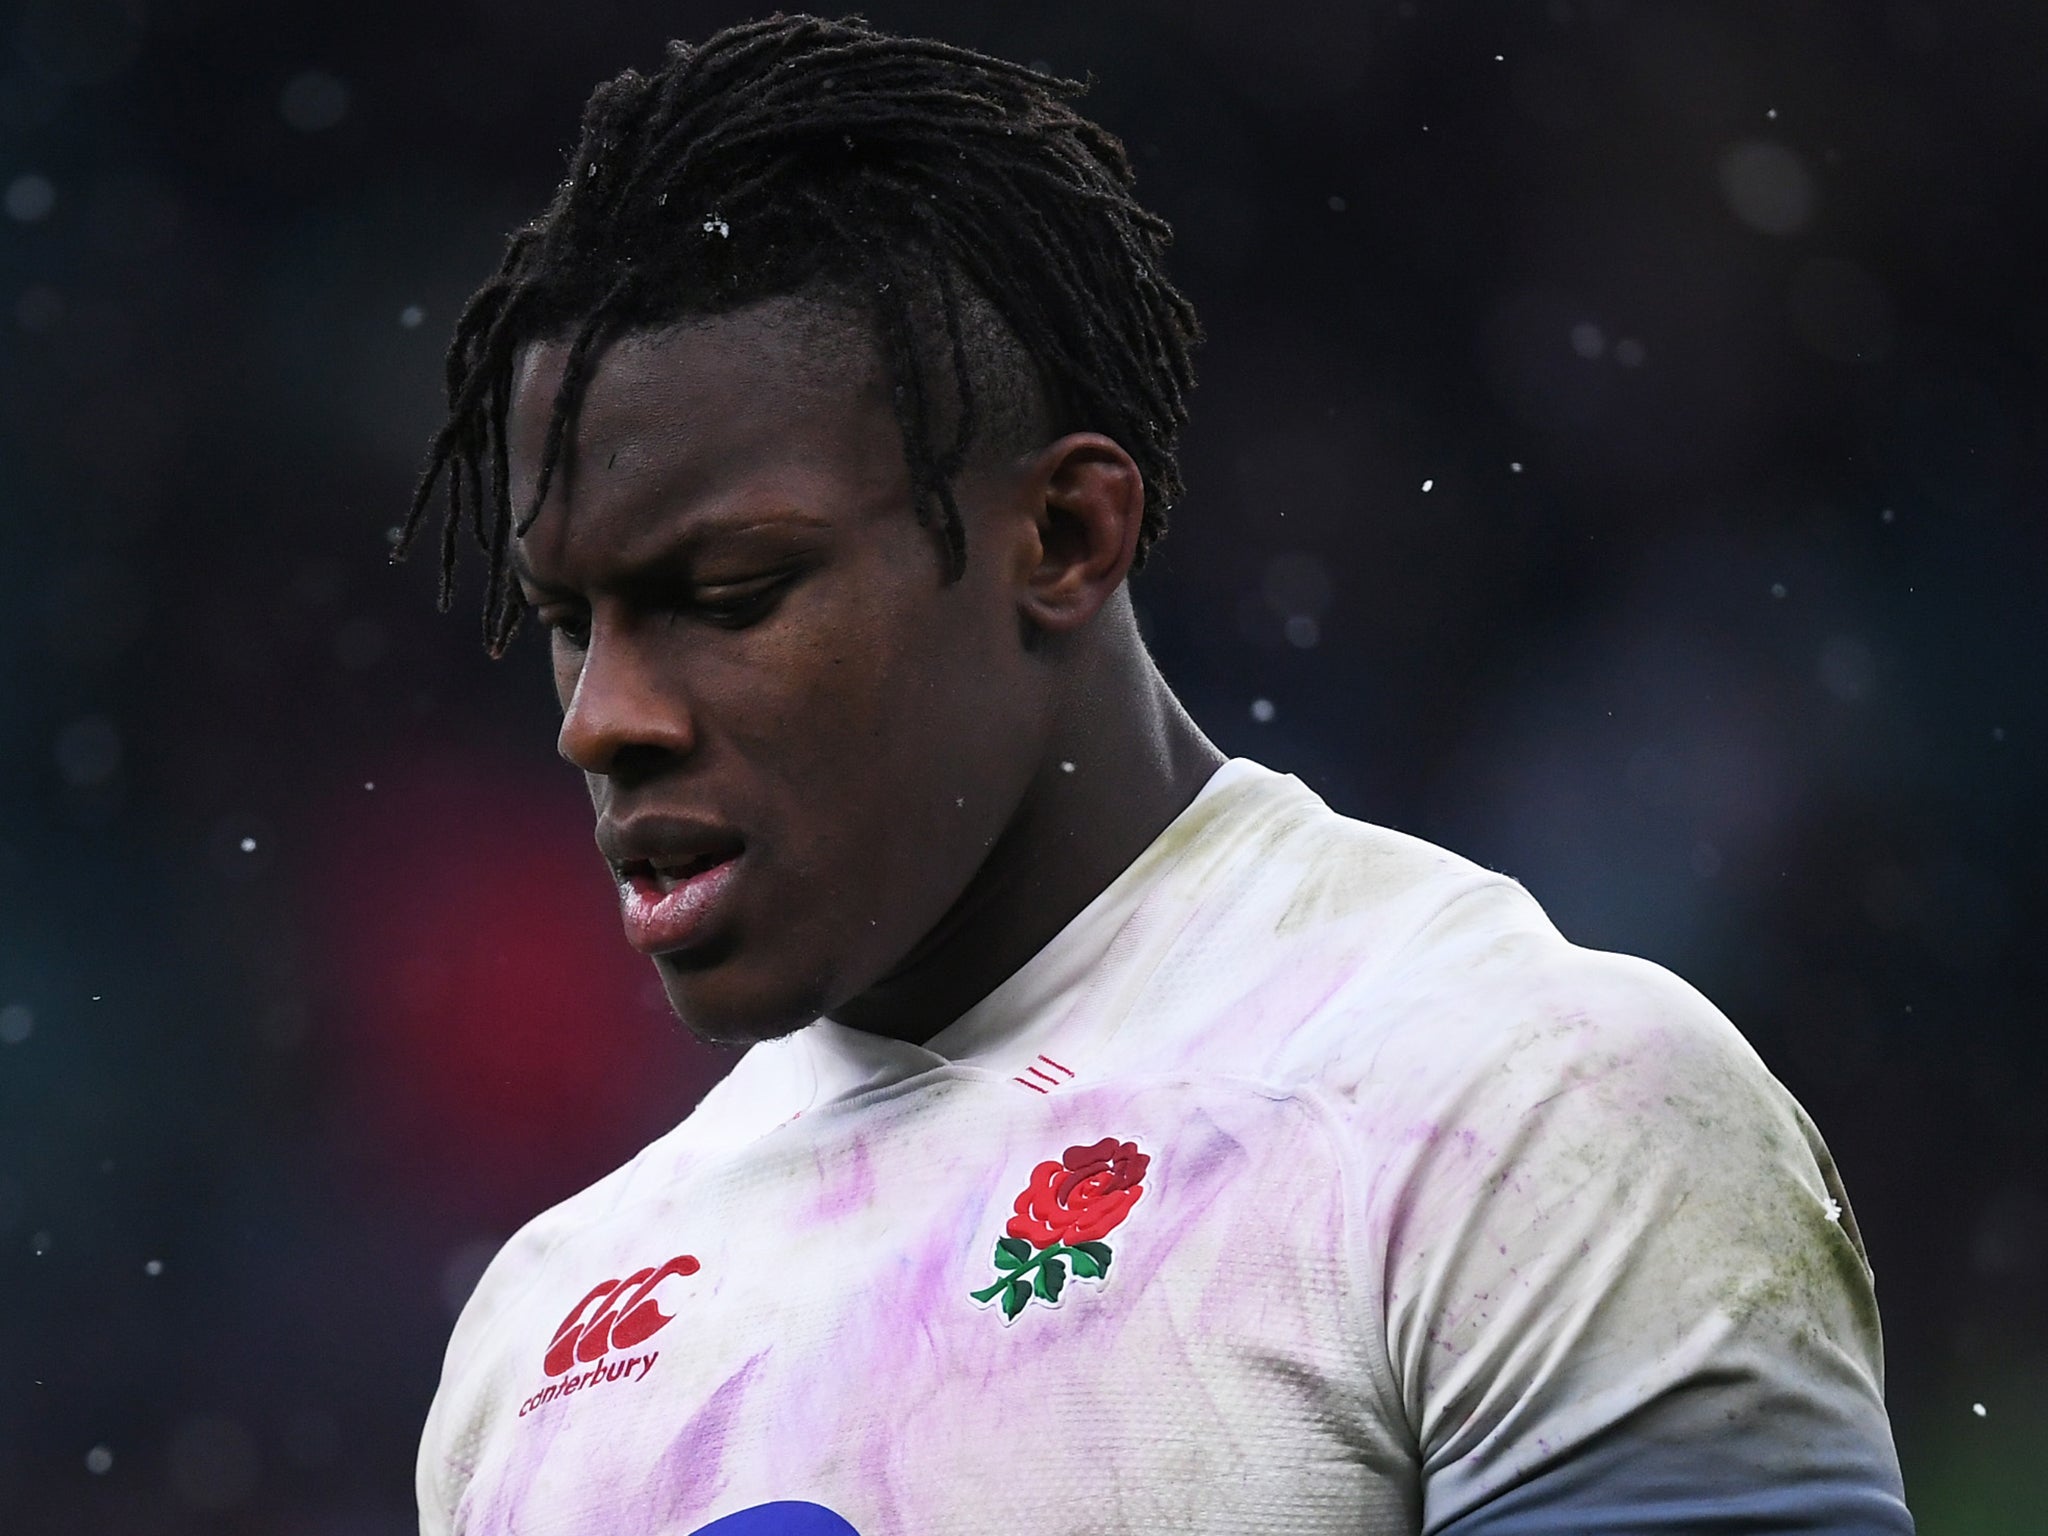 Maro Itoje's agent has been suspended from rugby for 22 months